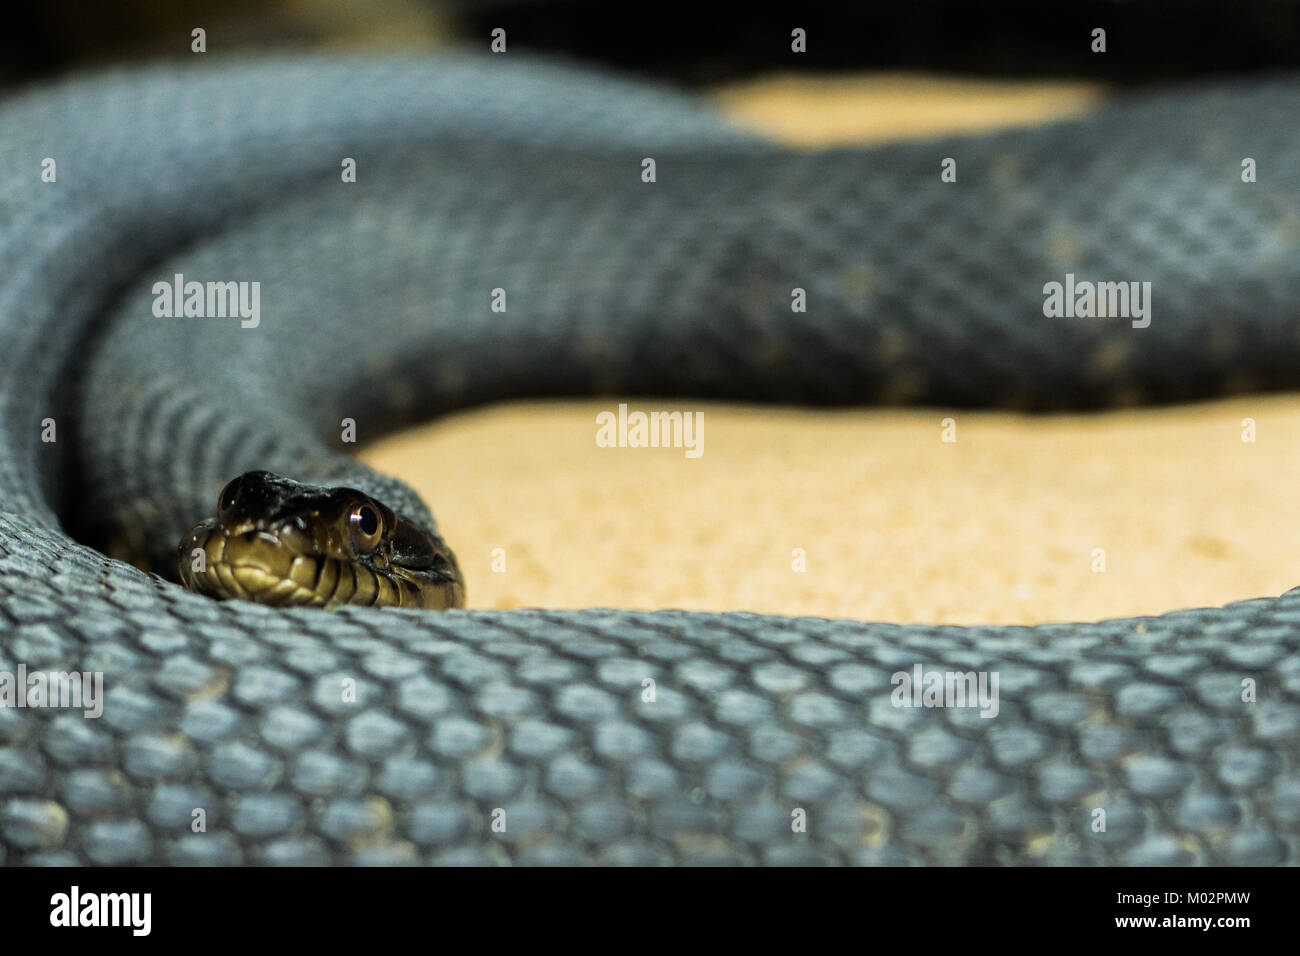 Tree Snake Curled Up - Black tree snake curled up on sand, looking at the camera with selective focus on the snakes head Stock Photo